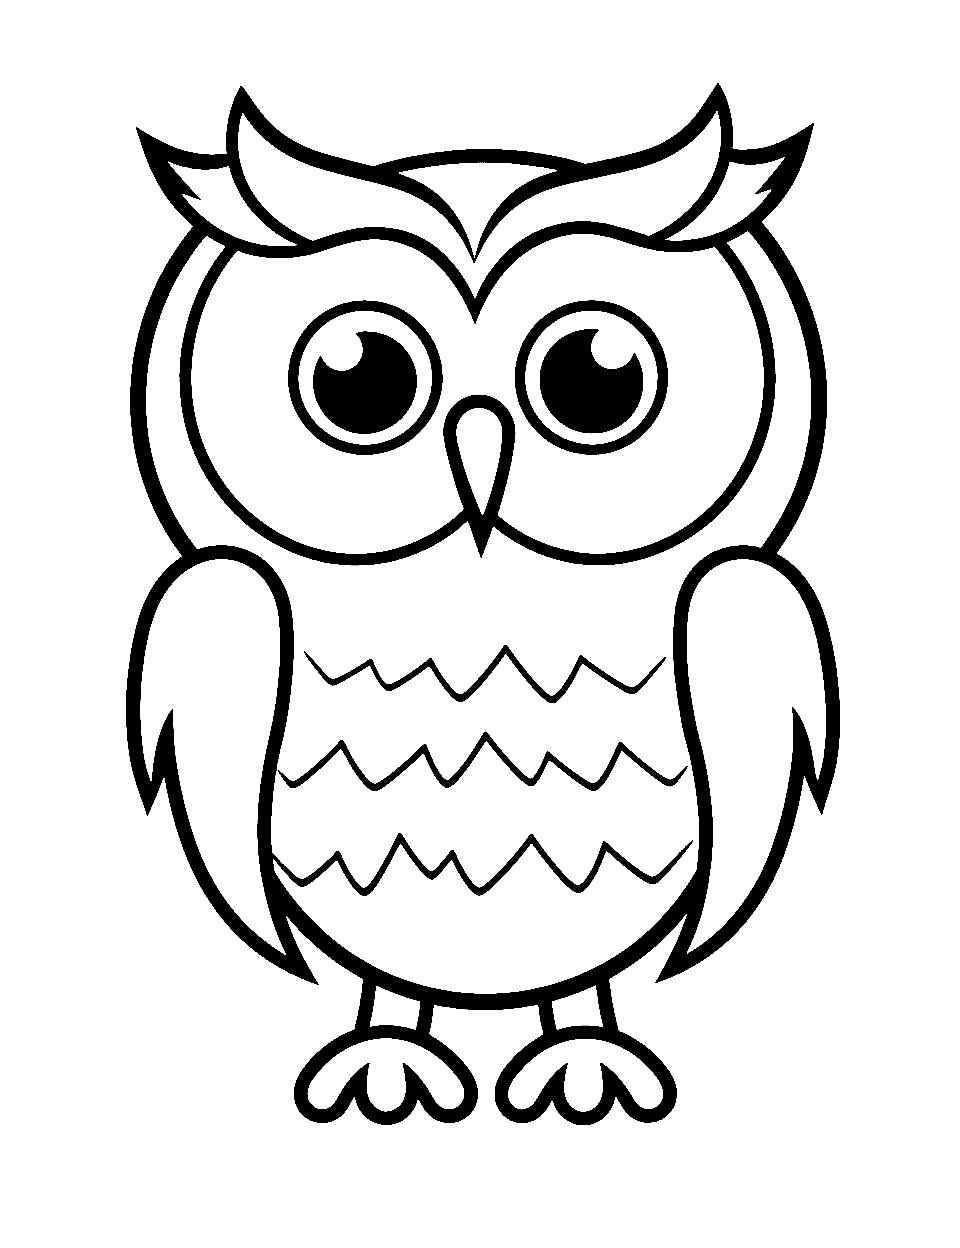 Easy Owl Outline Coloring Page - A simple, bold outline of an owl suitable for young children.